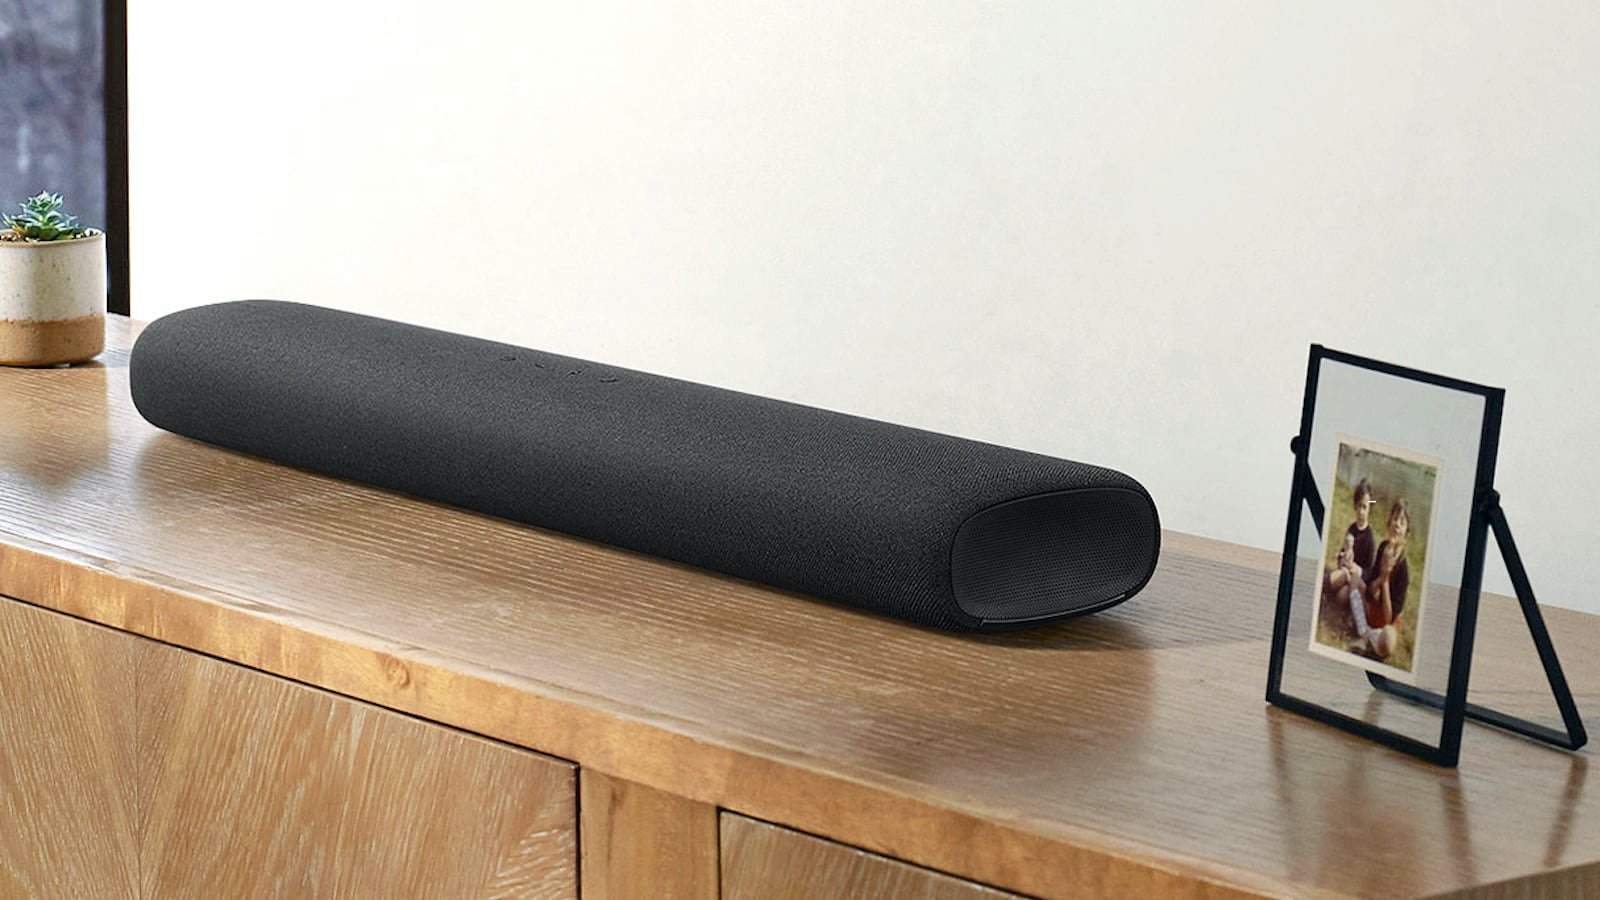 Samsung S60T All-in-One Soundbar offers Dolby Audio and DTS Digital Surround